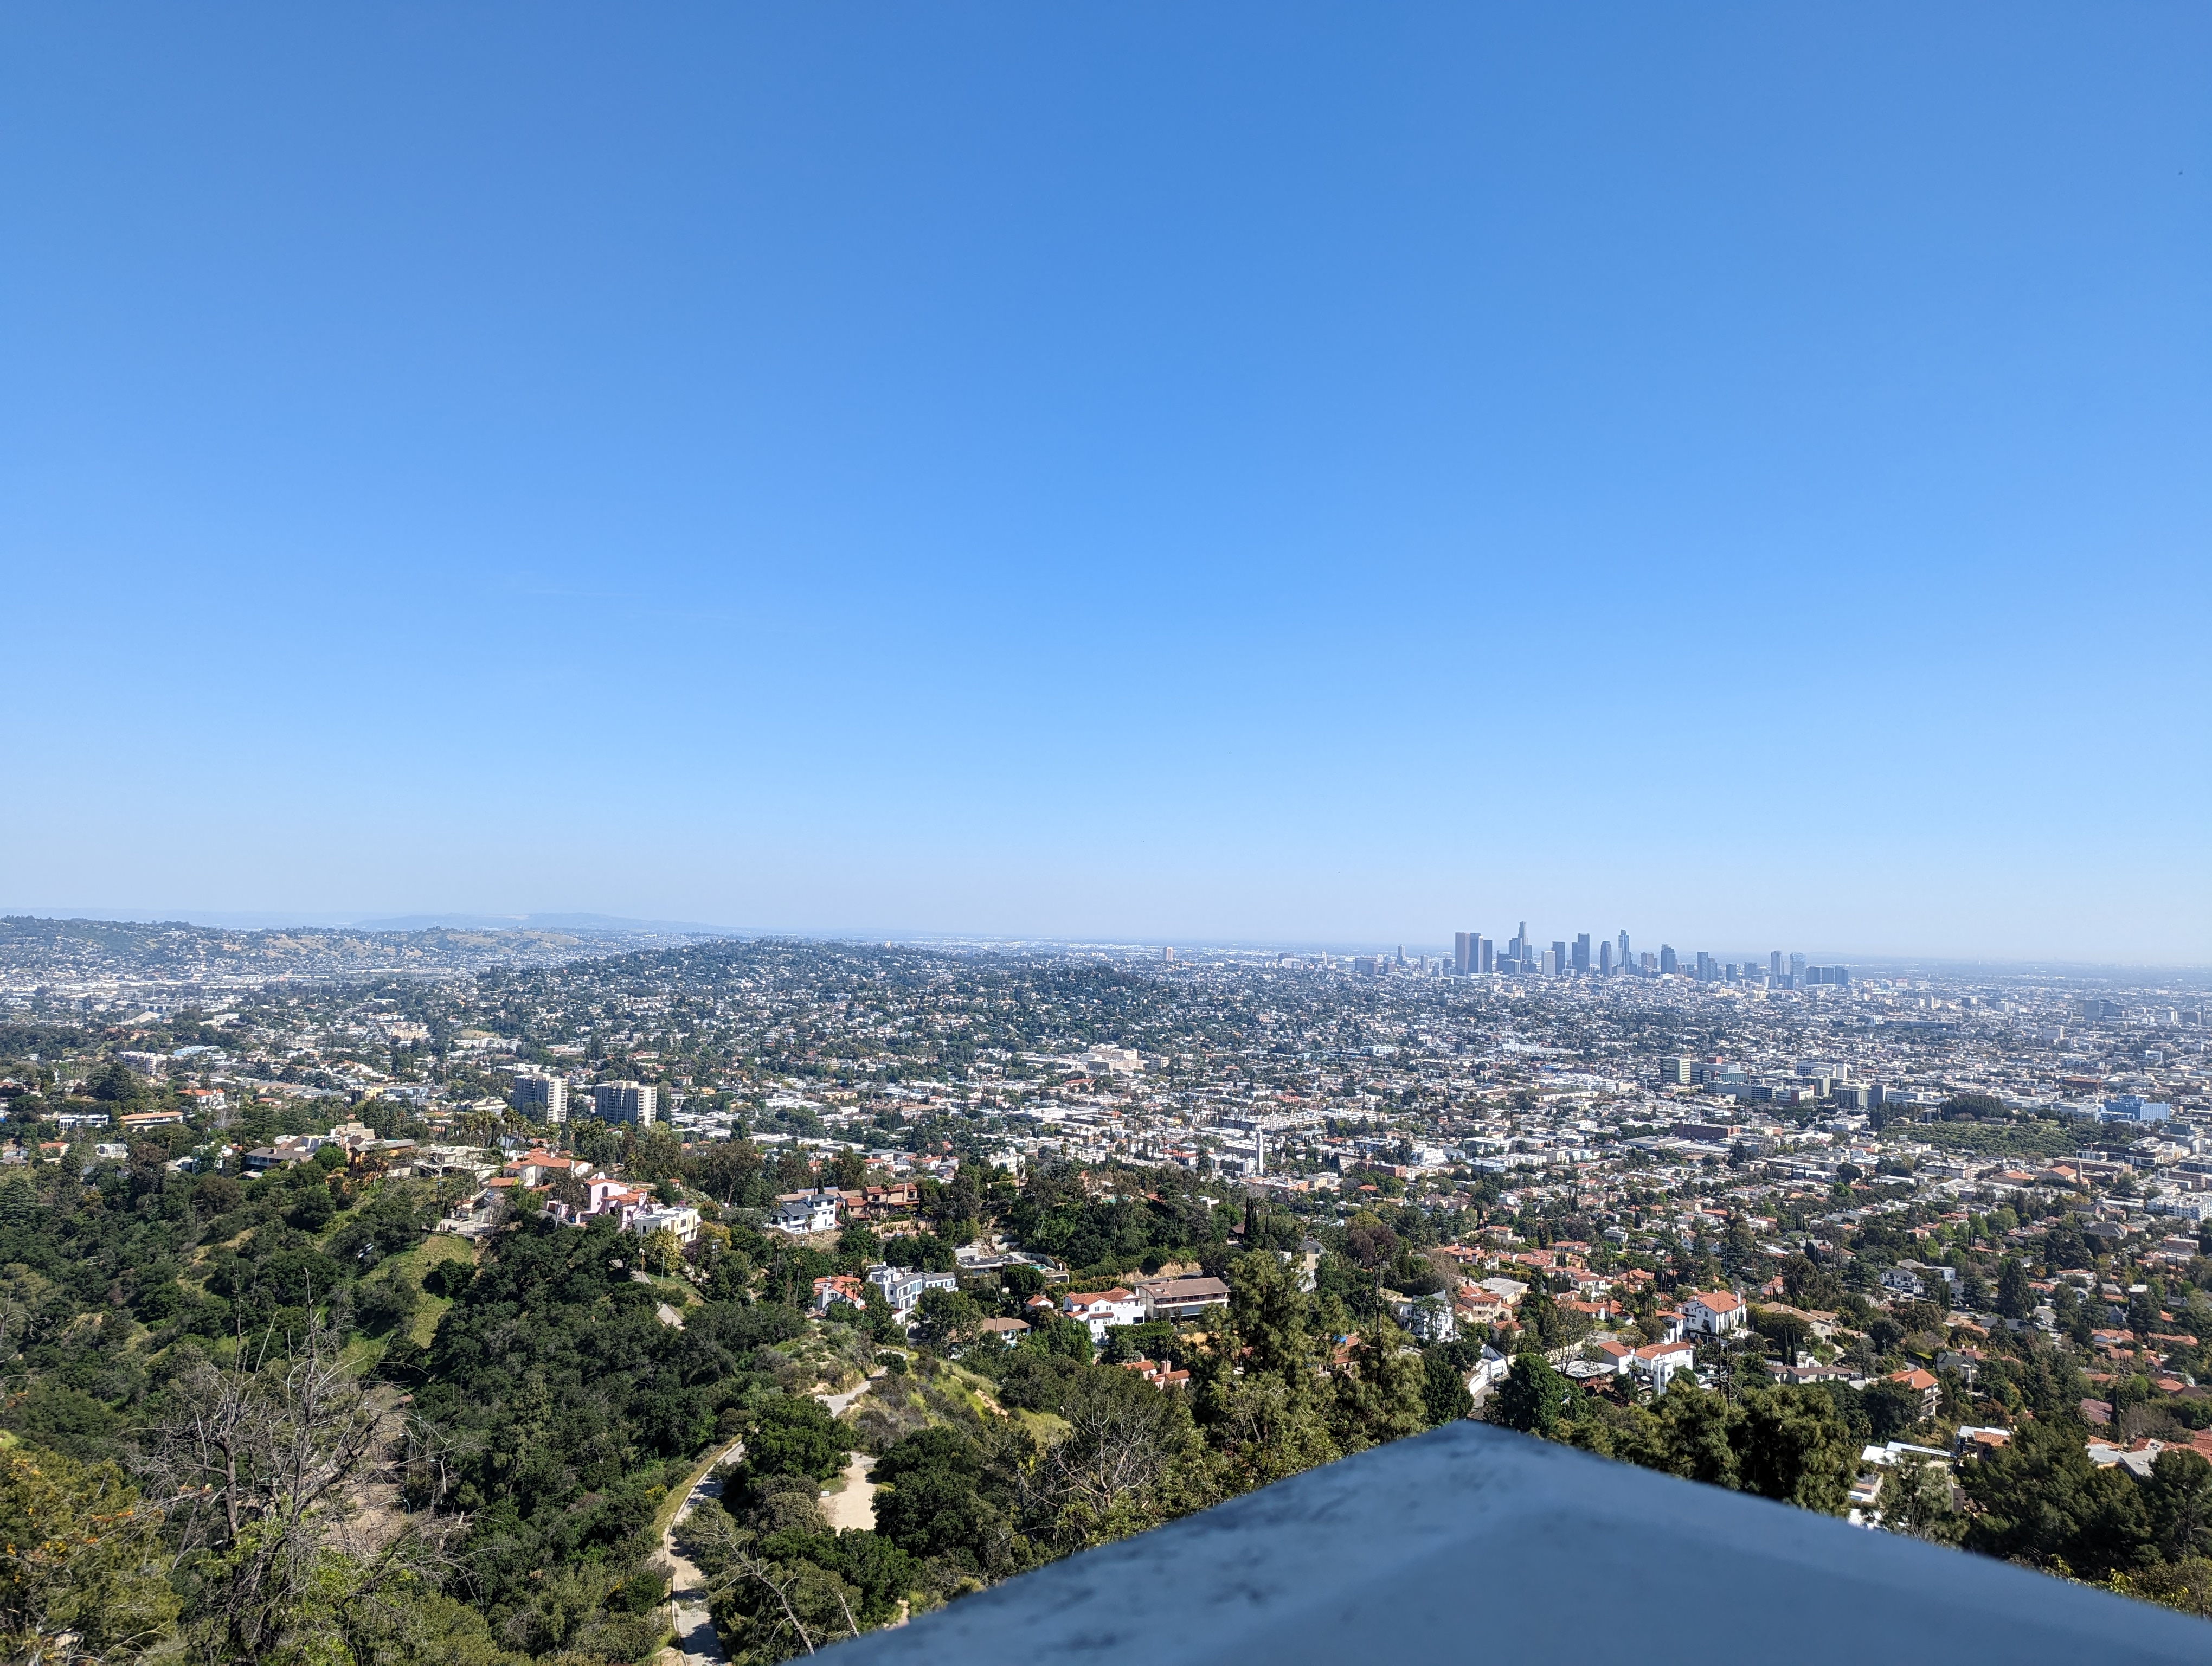 Los Angeles Cityscape (from Griffith Observatory)